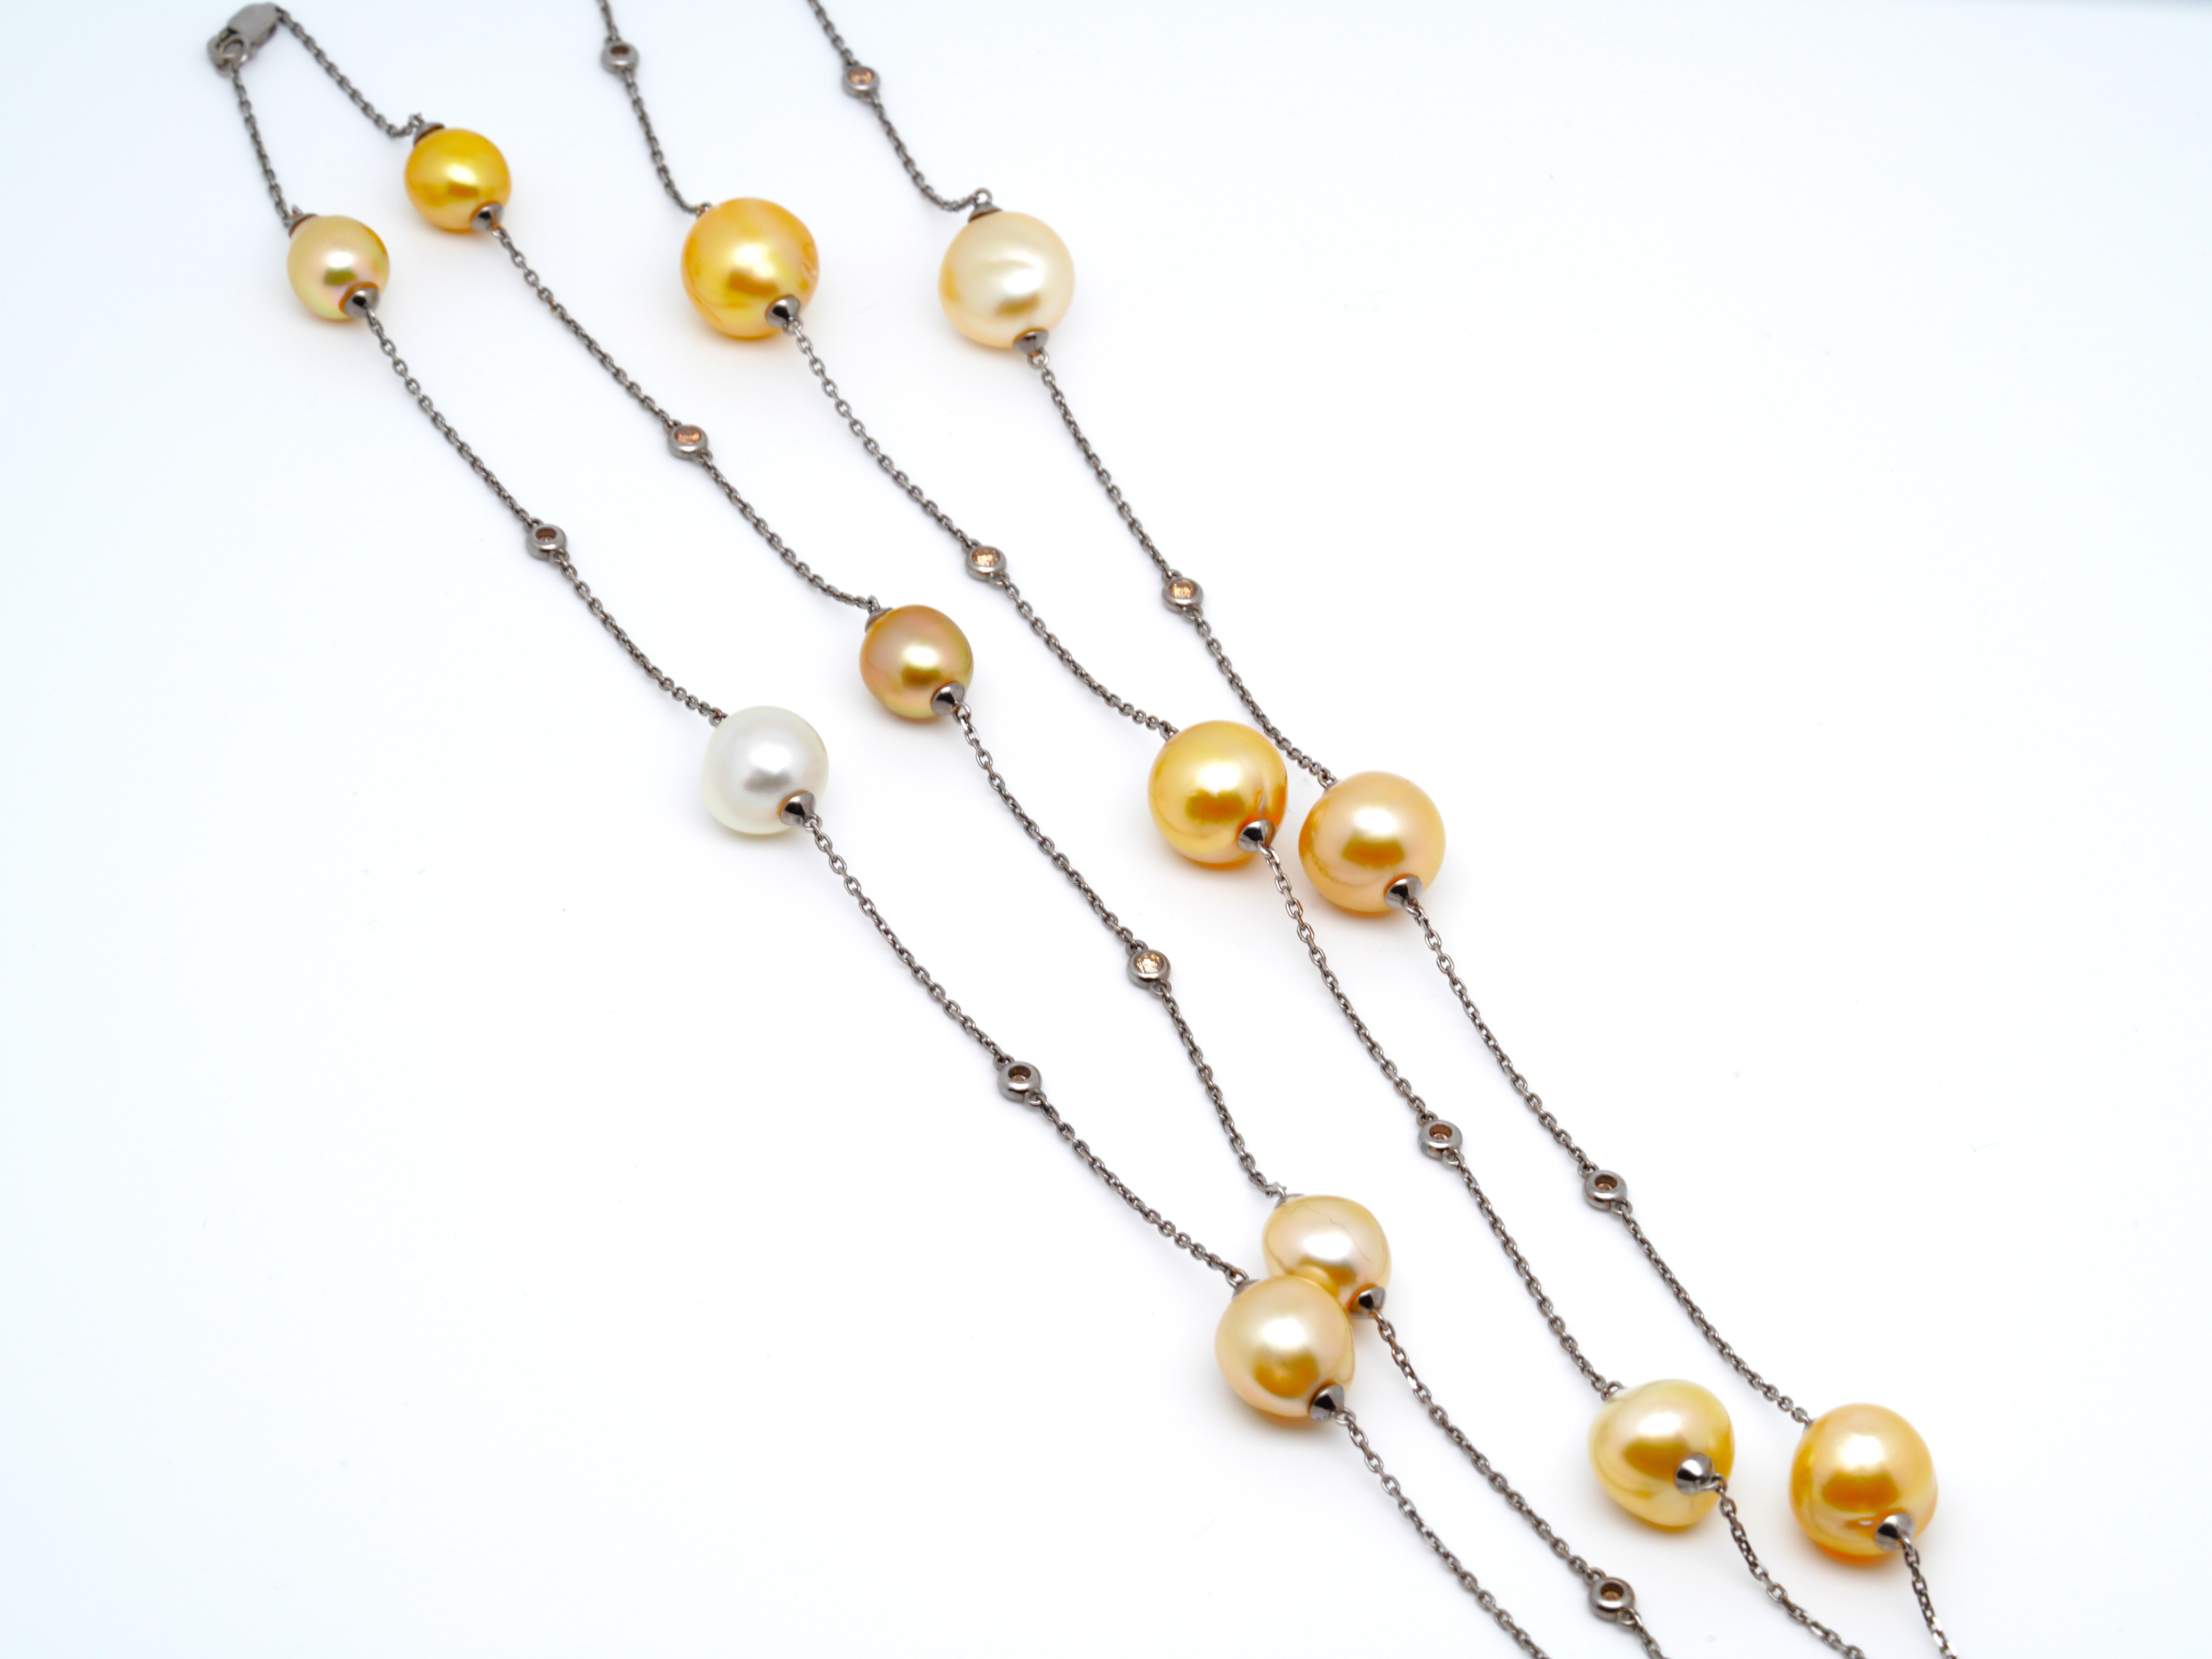 This necklace consist of 15 Gold South Sea Cultured Pearl (with size of 9.5 - 13mm), alternating with 14 round brilliant cut diamonds bezel set in 18K White Gold. The necklace is designed with a lobster clasp so that it can be worn in a single long